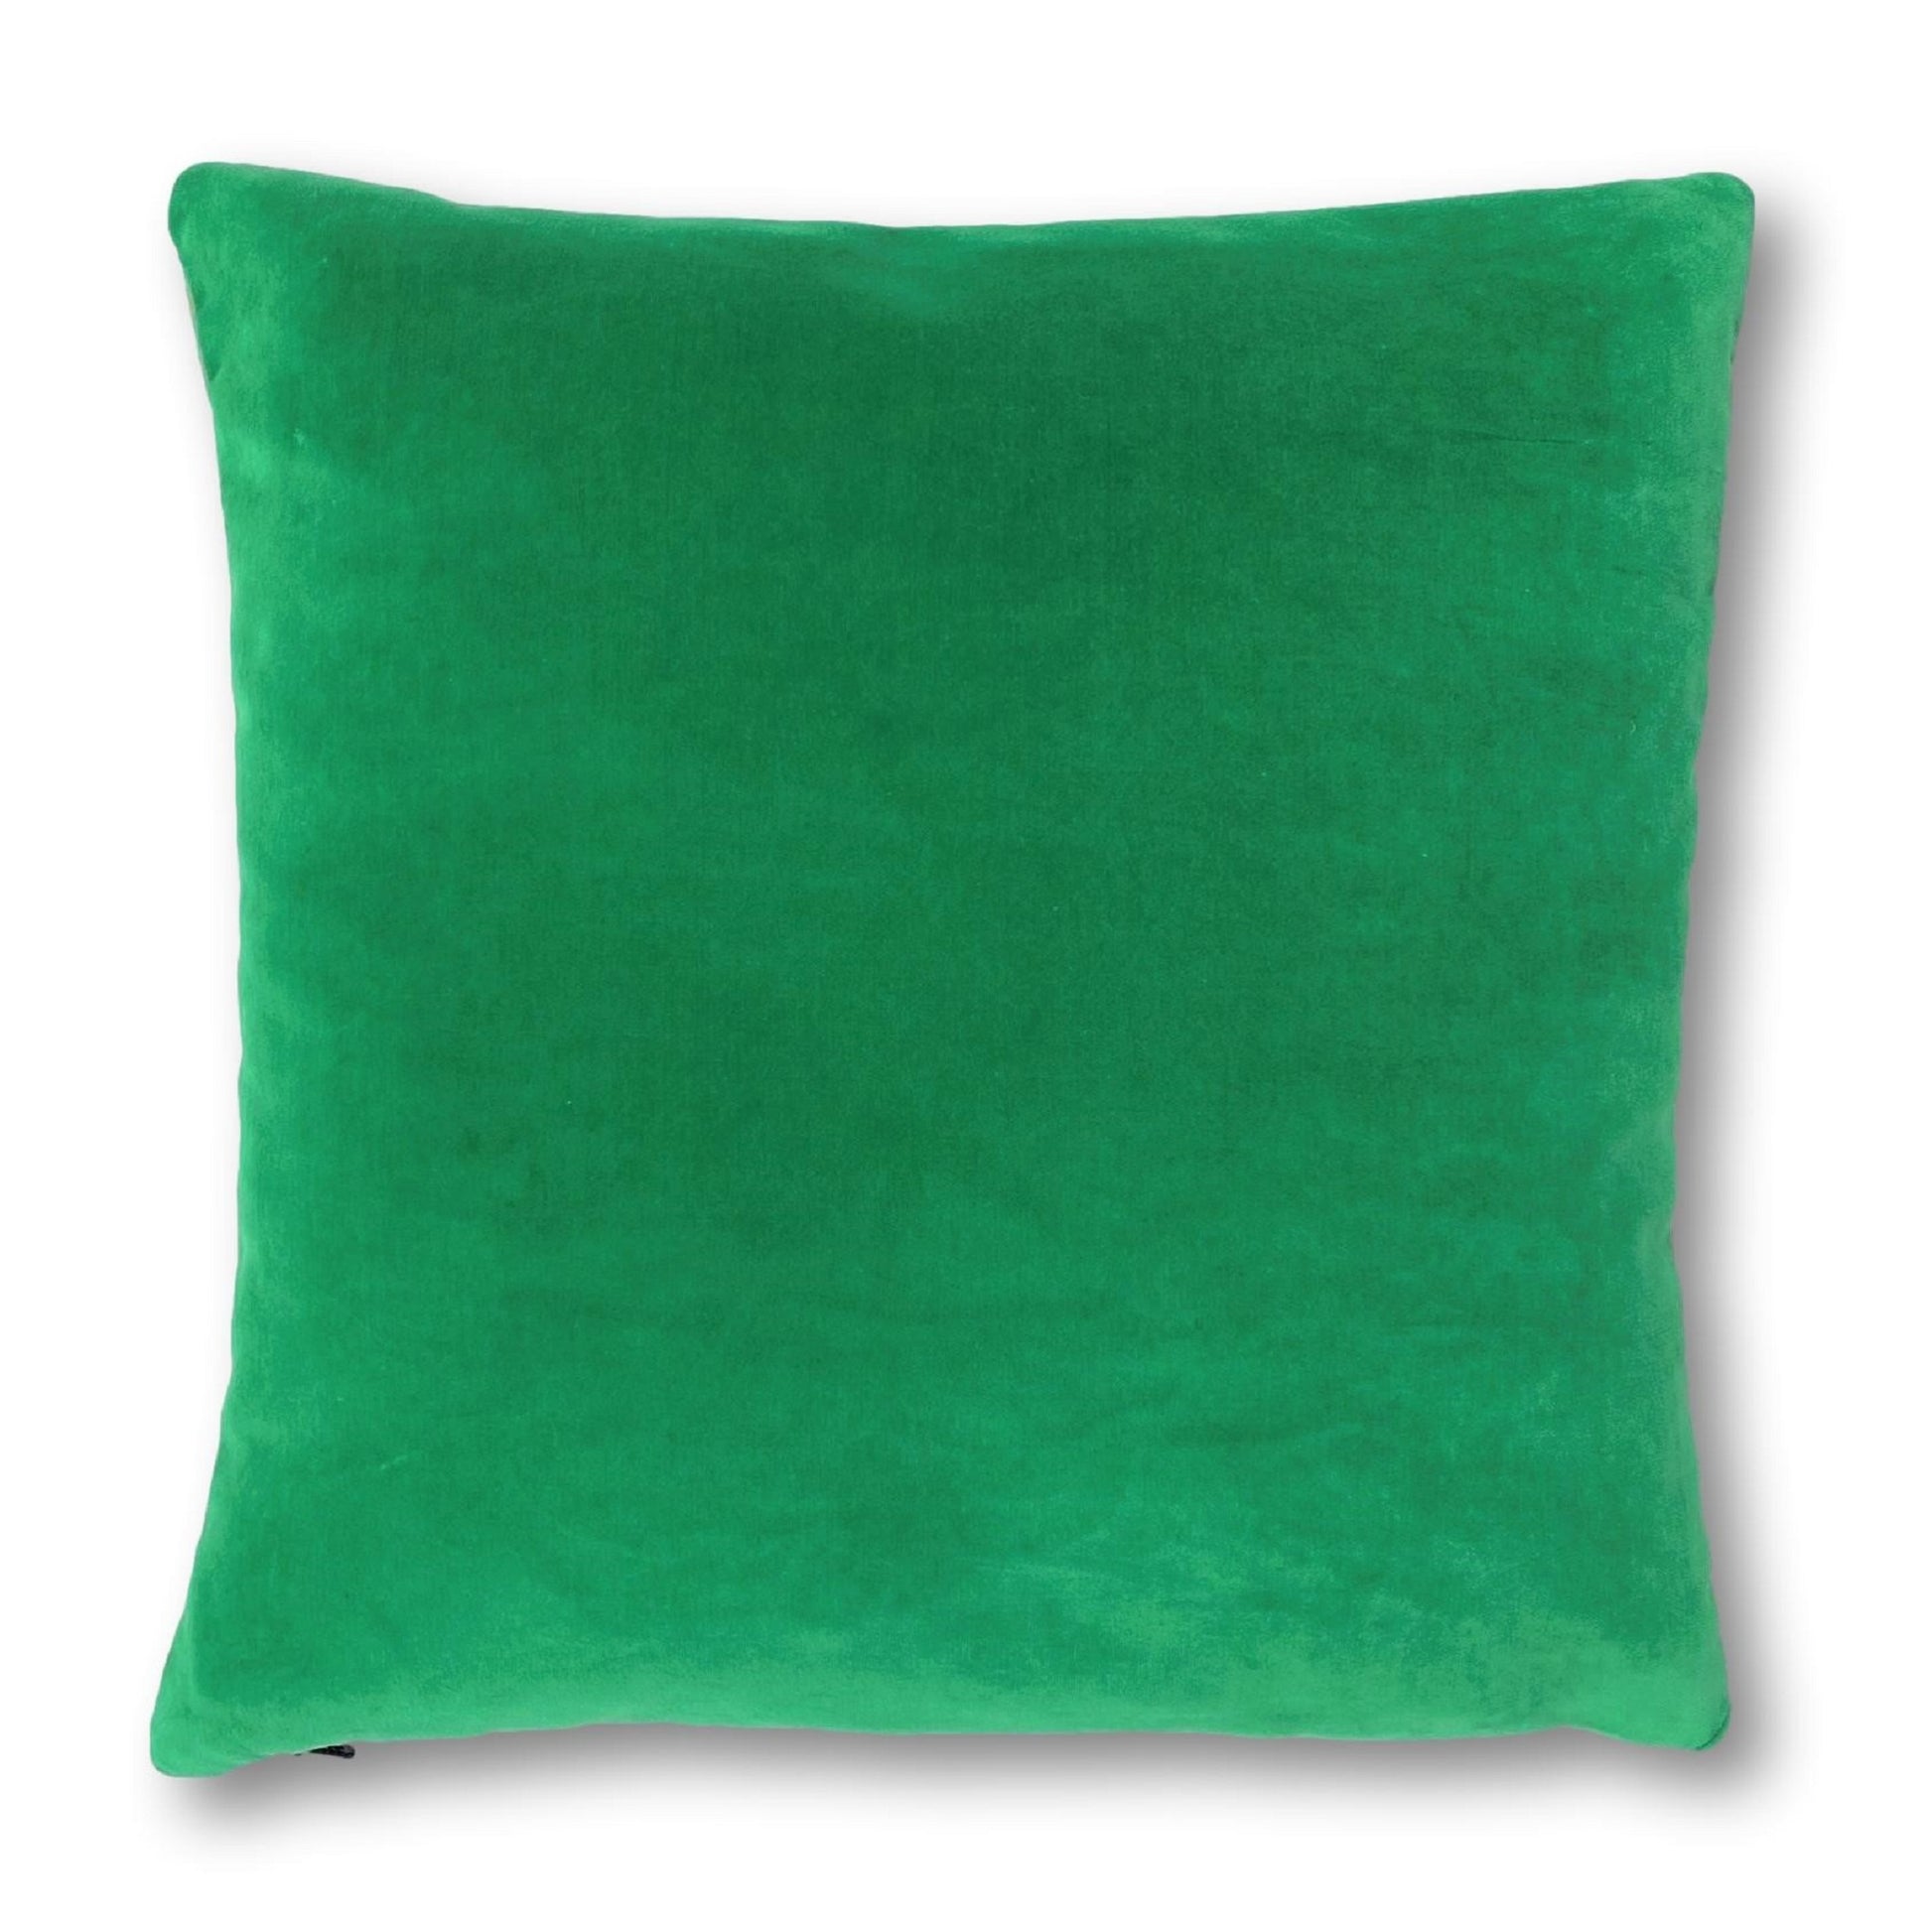 green and pink cushion luxe 39